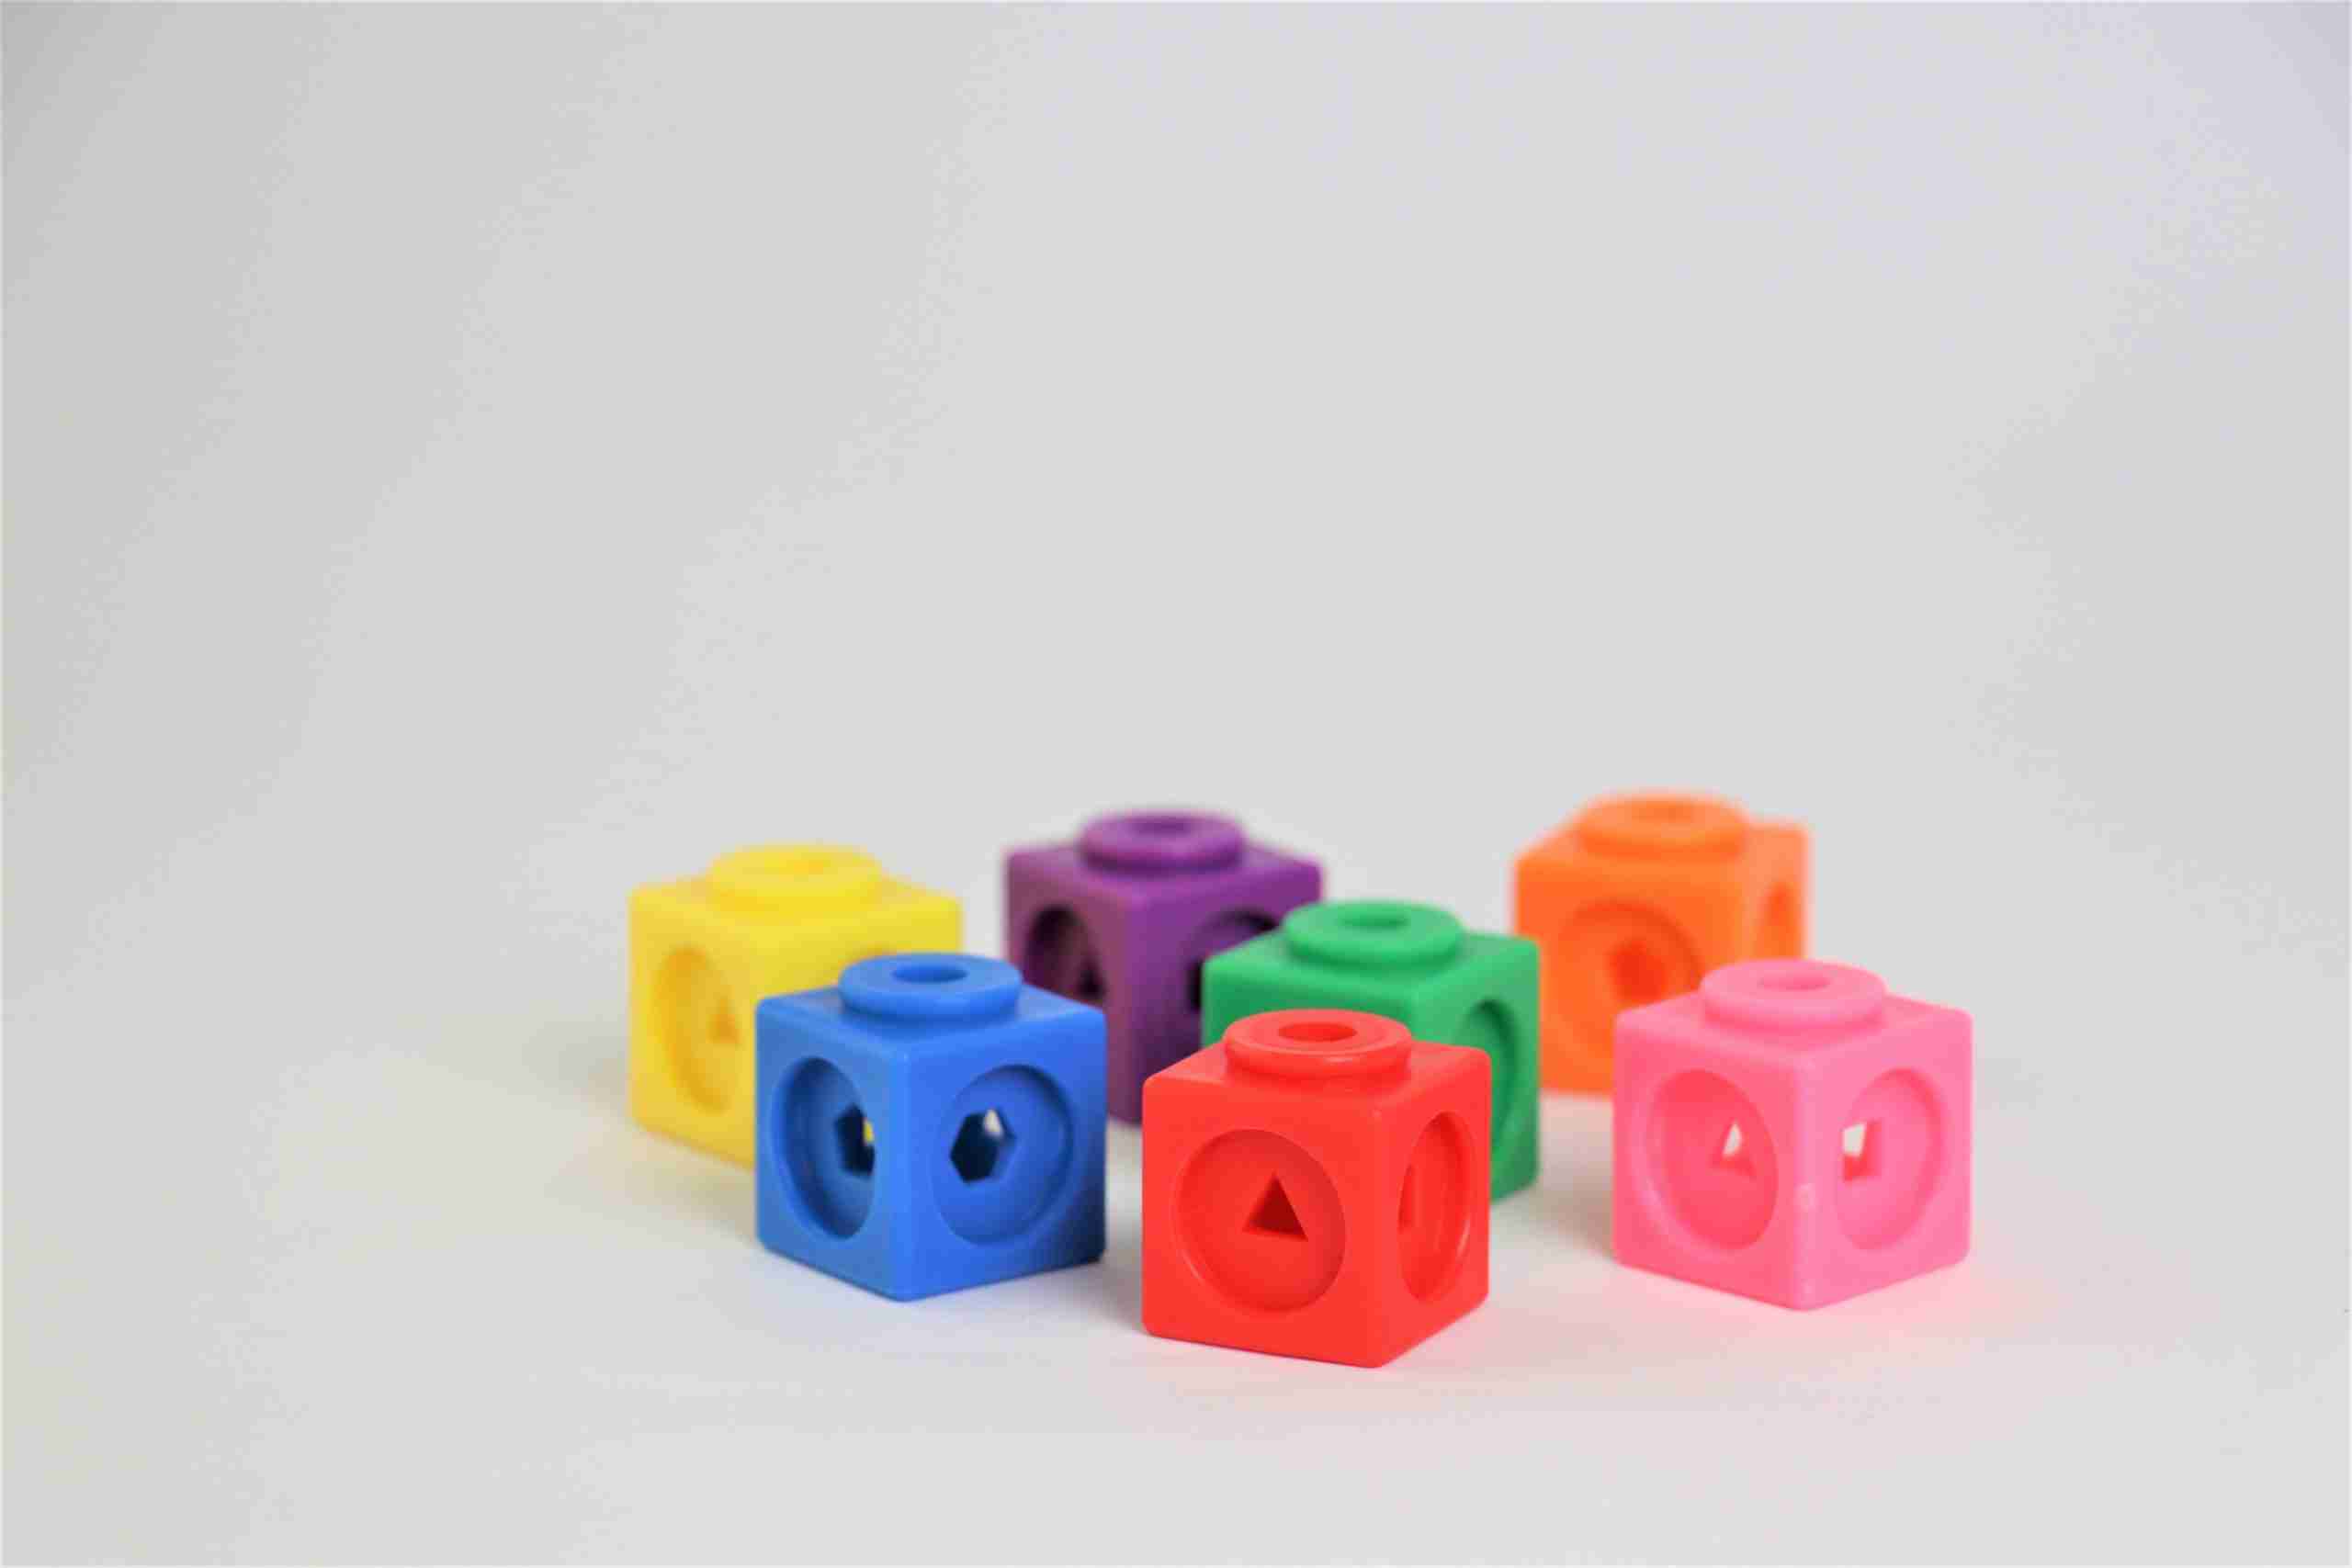 Square cubes used for mathematics lesson